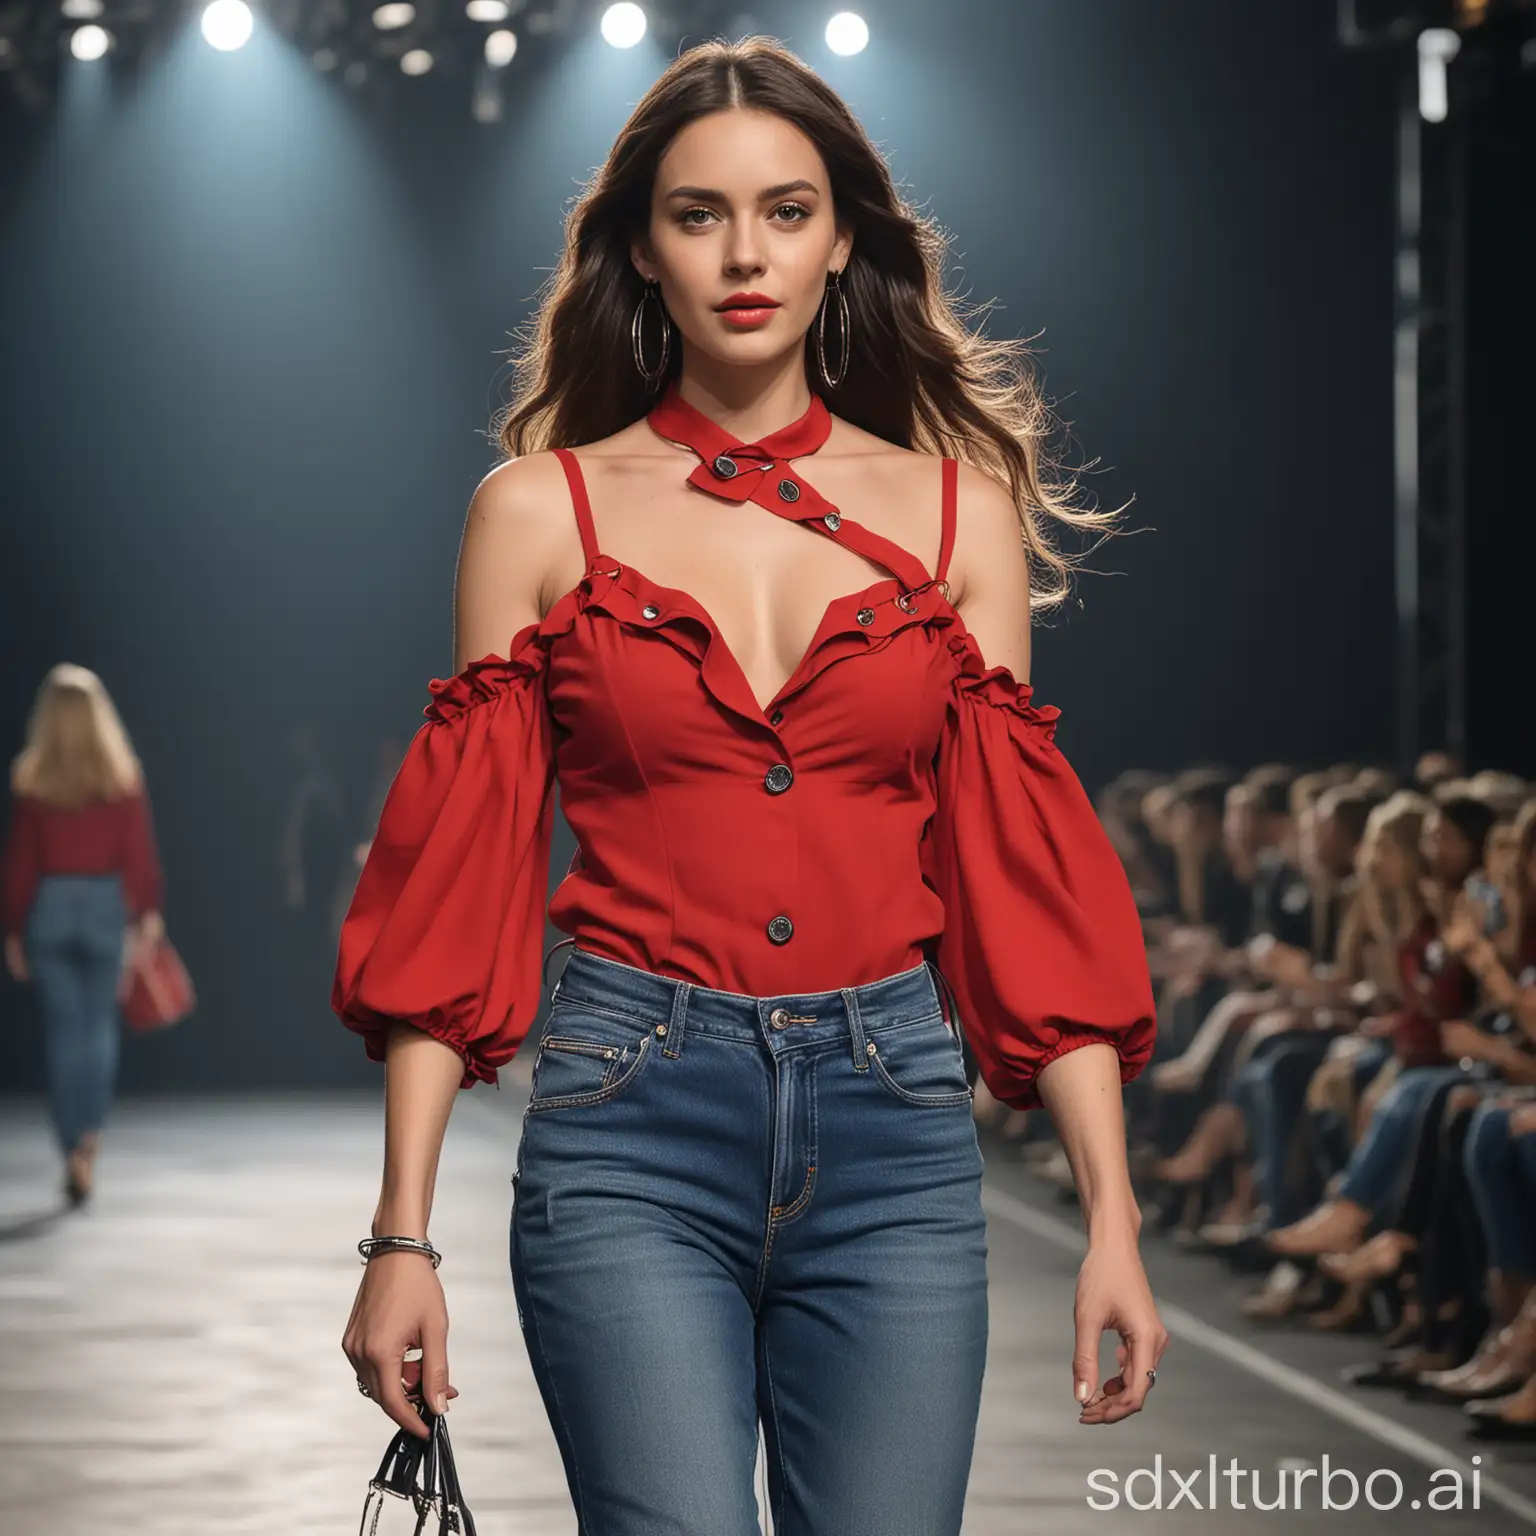 A confident woman walking on a fashion runway, wearing a stylish red blouse with unique shoulder cutout design and high-waisted blue jeans. She has long, flowing hair, large hoop earrings, and is carrying a shoulder bag. The background is a dark, elegant stage. The overall vibe is fashionable and modern.